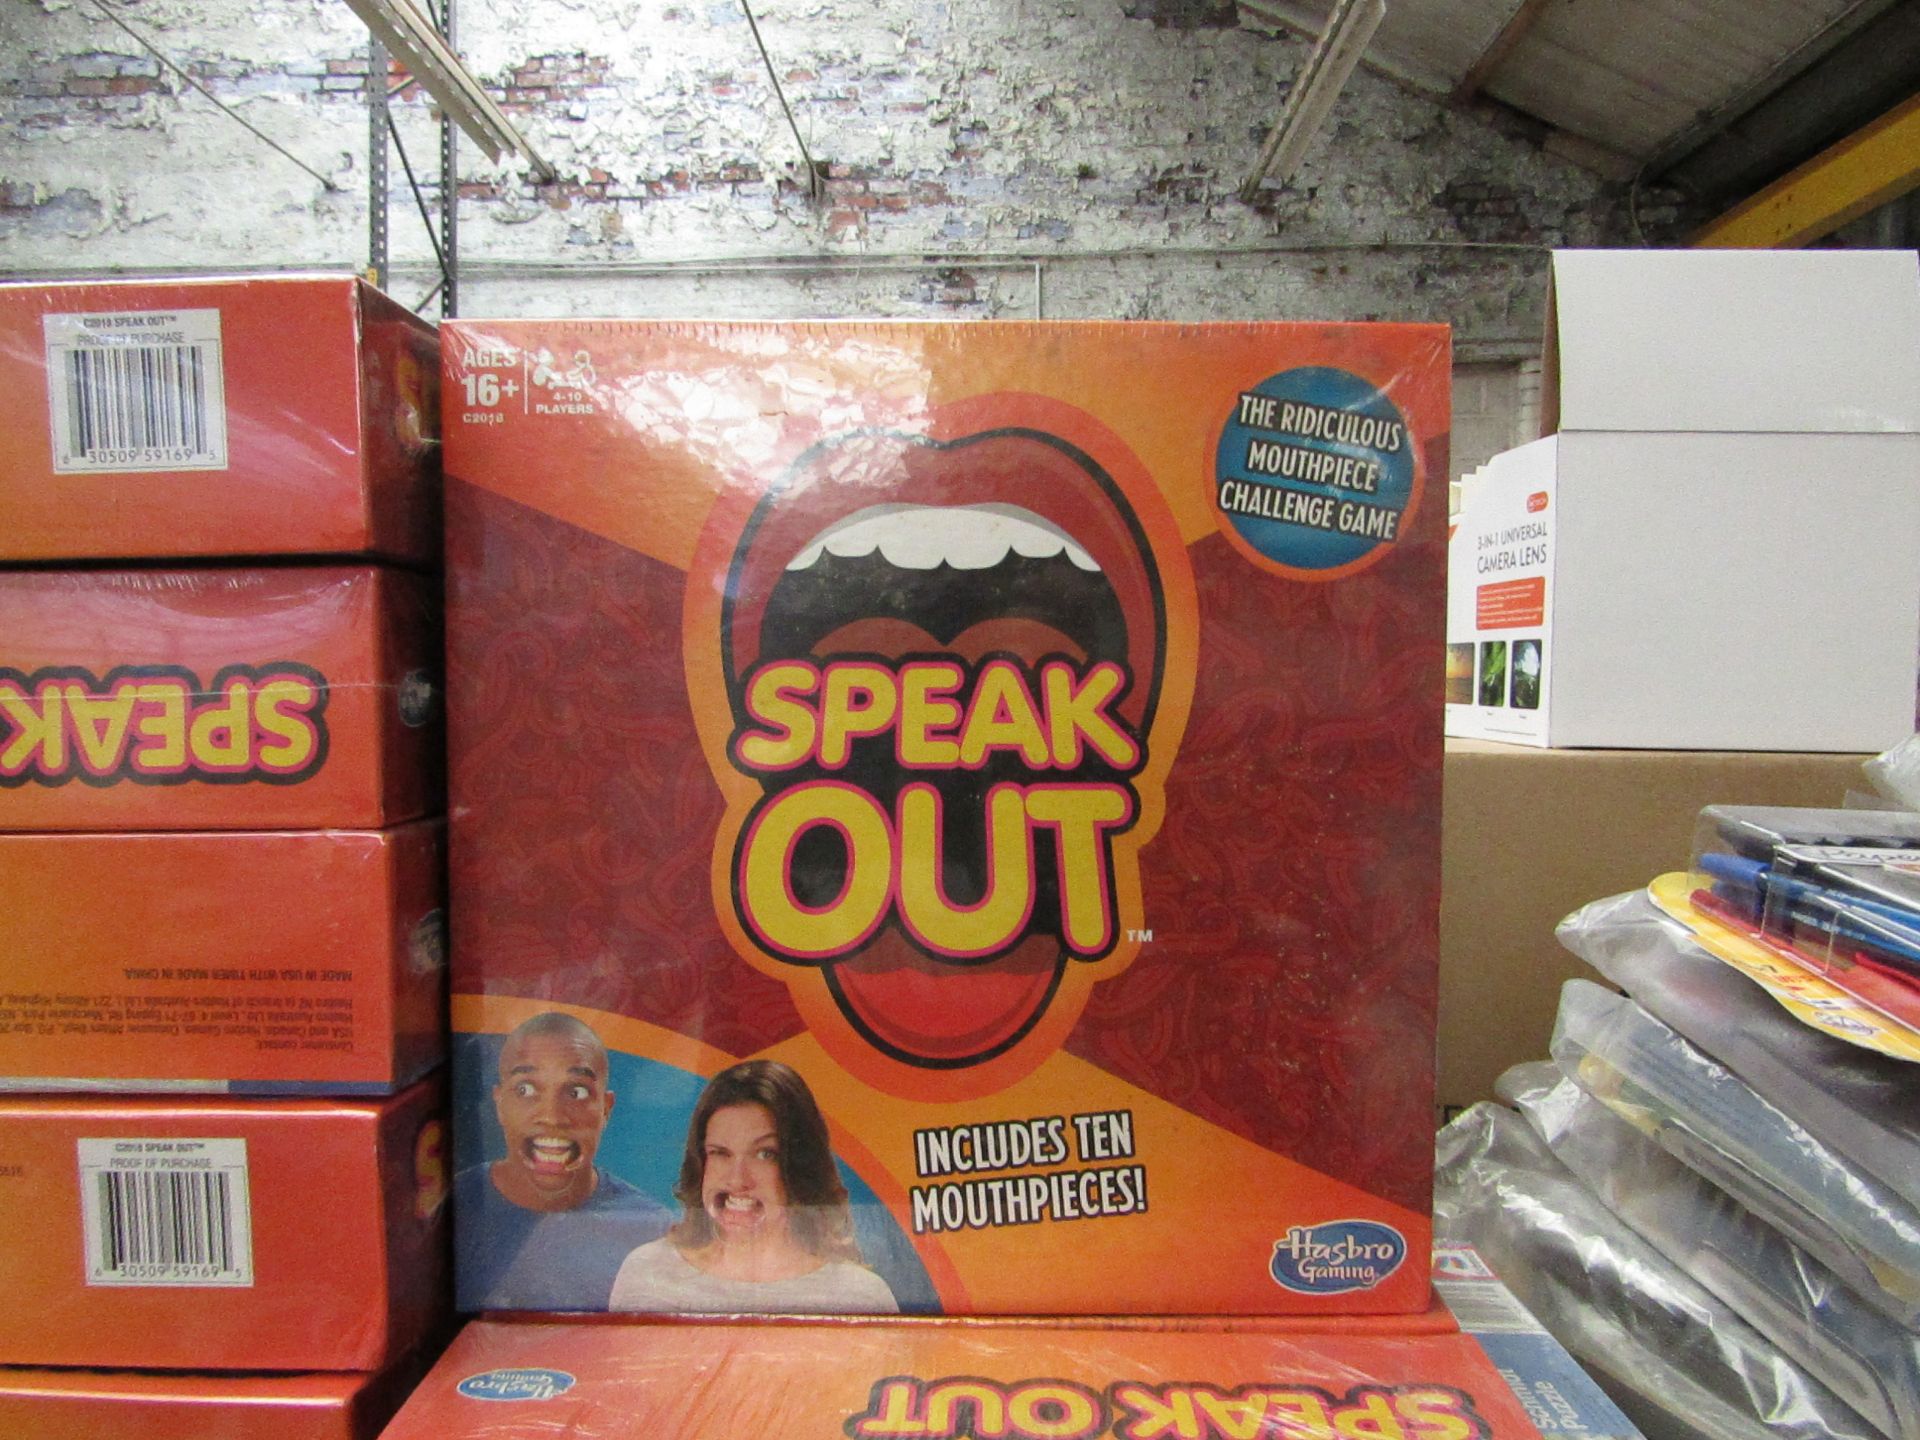 Hasbro Gaming - Speak-Out The Ridiculous MouthPiece Challenge Game, Includes 10 Mouth Pieces